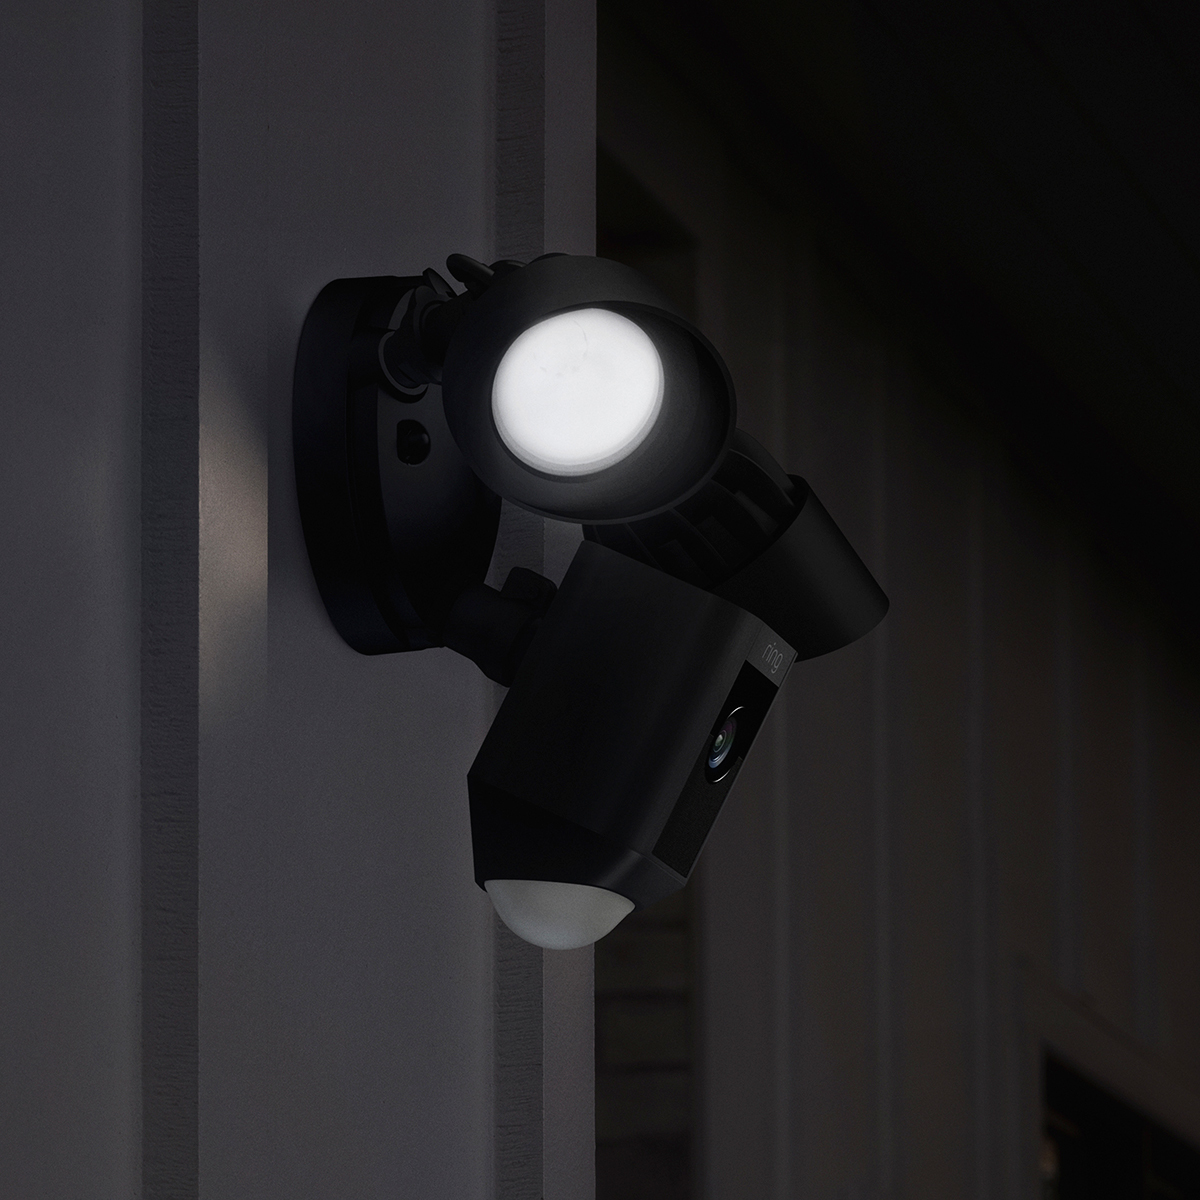 Ring Hardwired Floodlight Camera with Chime Pro Costco UK